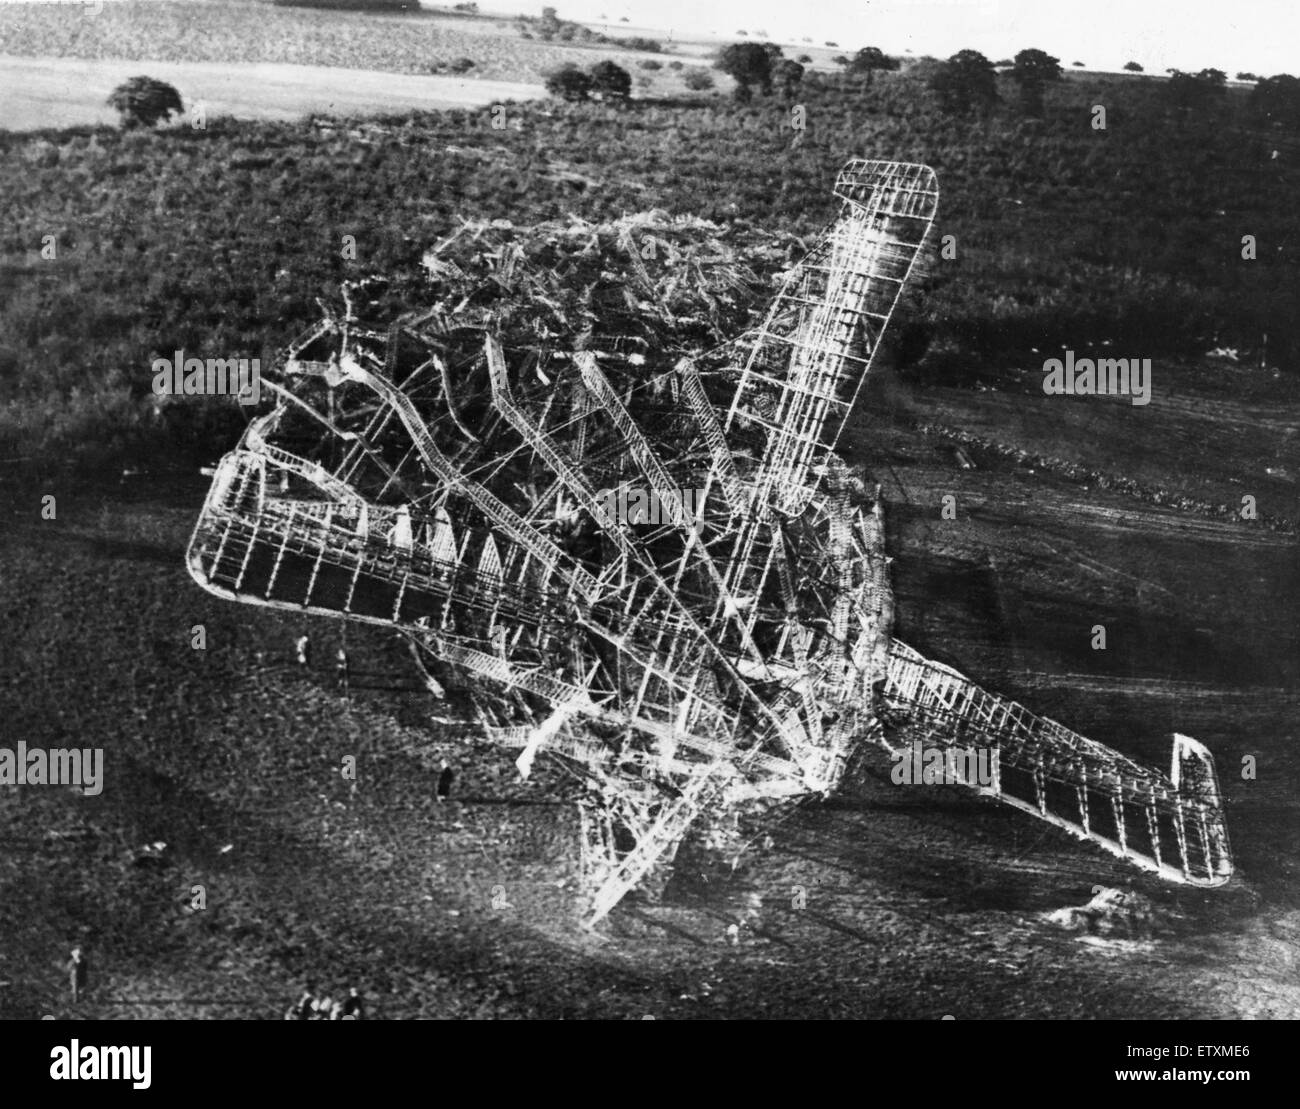 Aerial view of the wreckage of the R101 airship that crashed into a hill near Beauvais, France, in the early hours of the 5th October killing 48 of her 54 crew and passengers. The airship had been making her way to India on her maiden overseas flight when Stock Photo